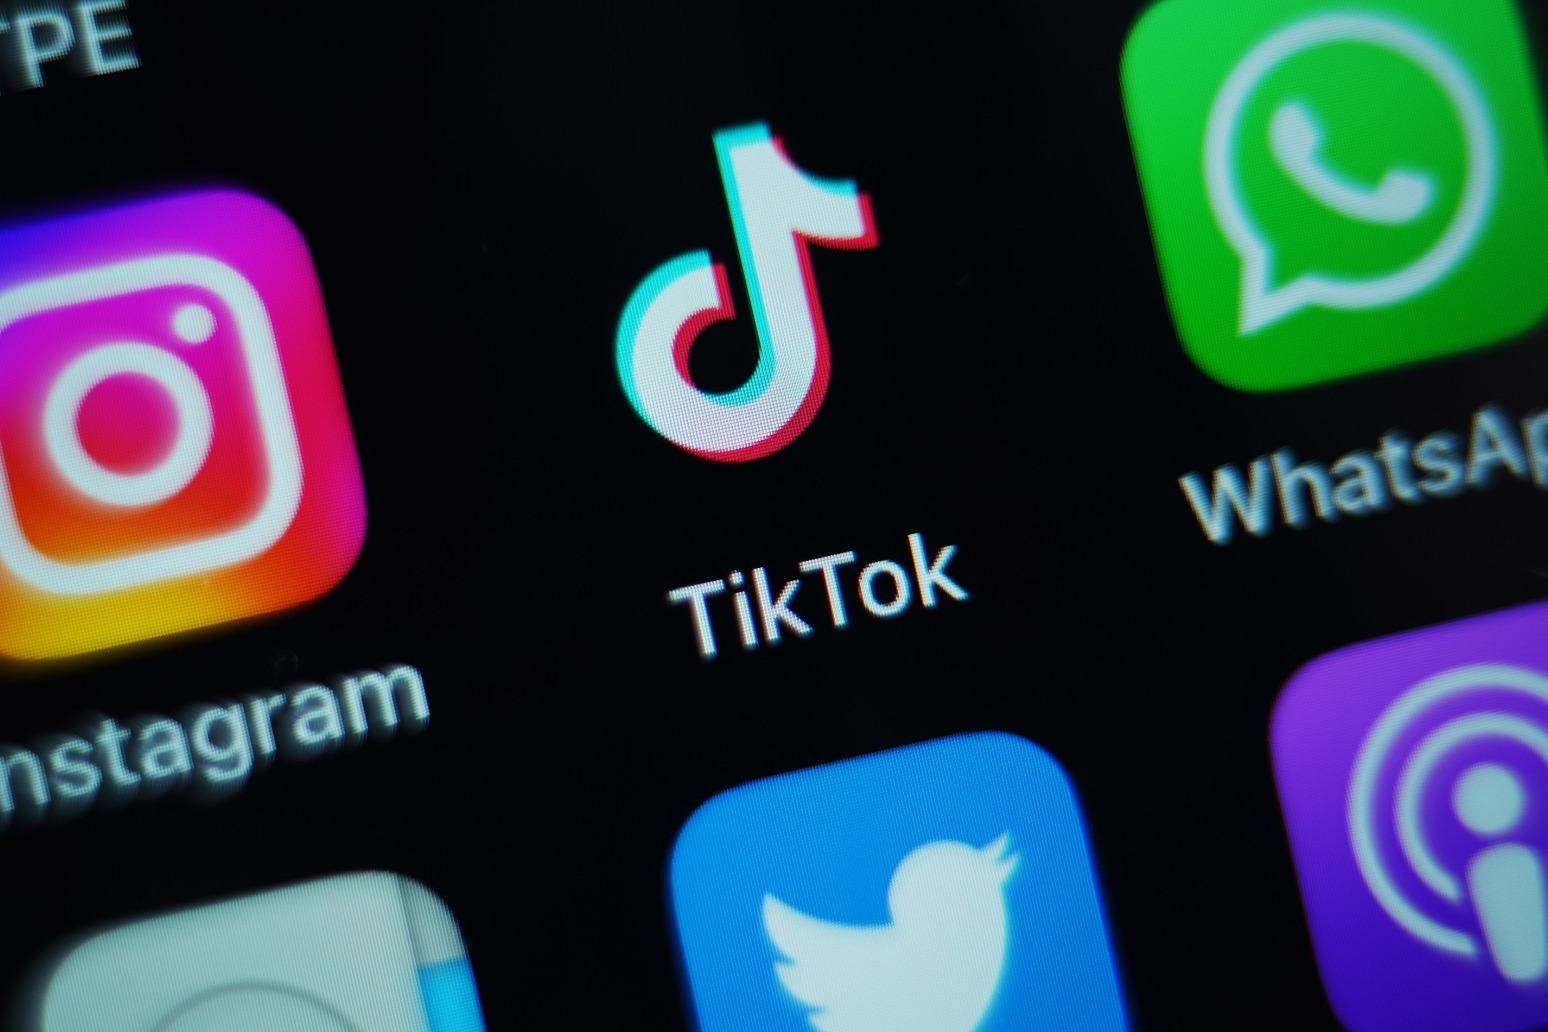 Sexist comments on TikTok ‘more liked’ than non-sexist ones – study 